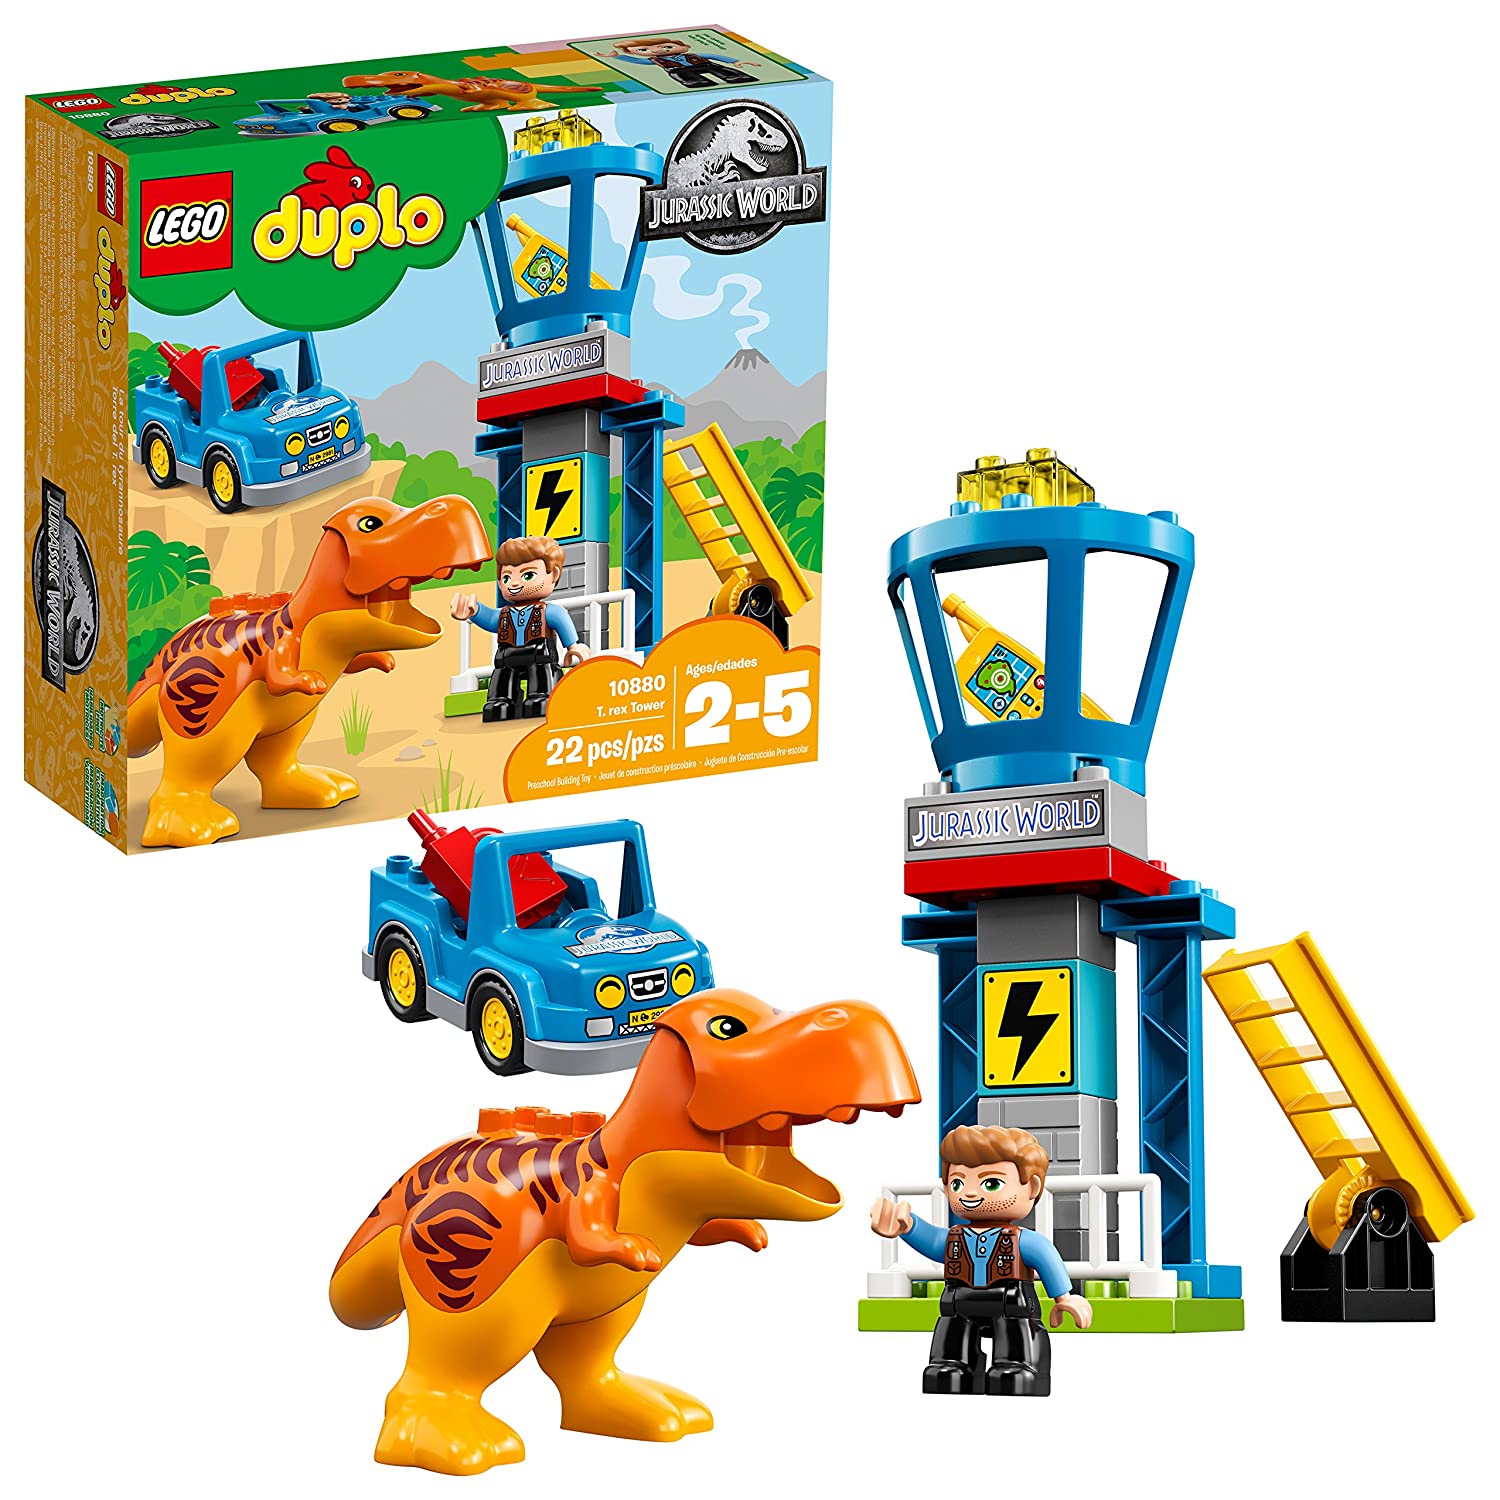 Top 9 Best Lego Duplo Sets Reviews in 2022 8